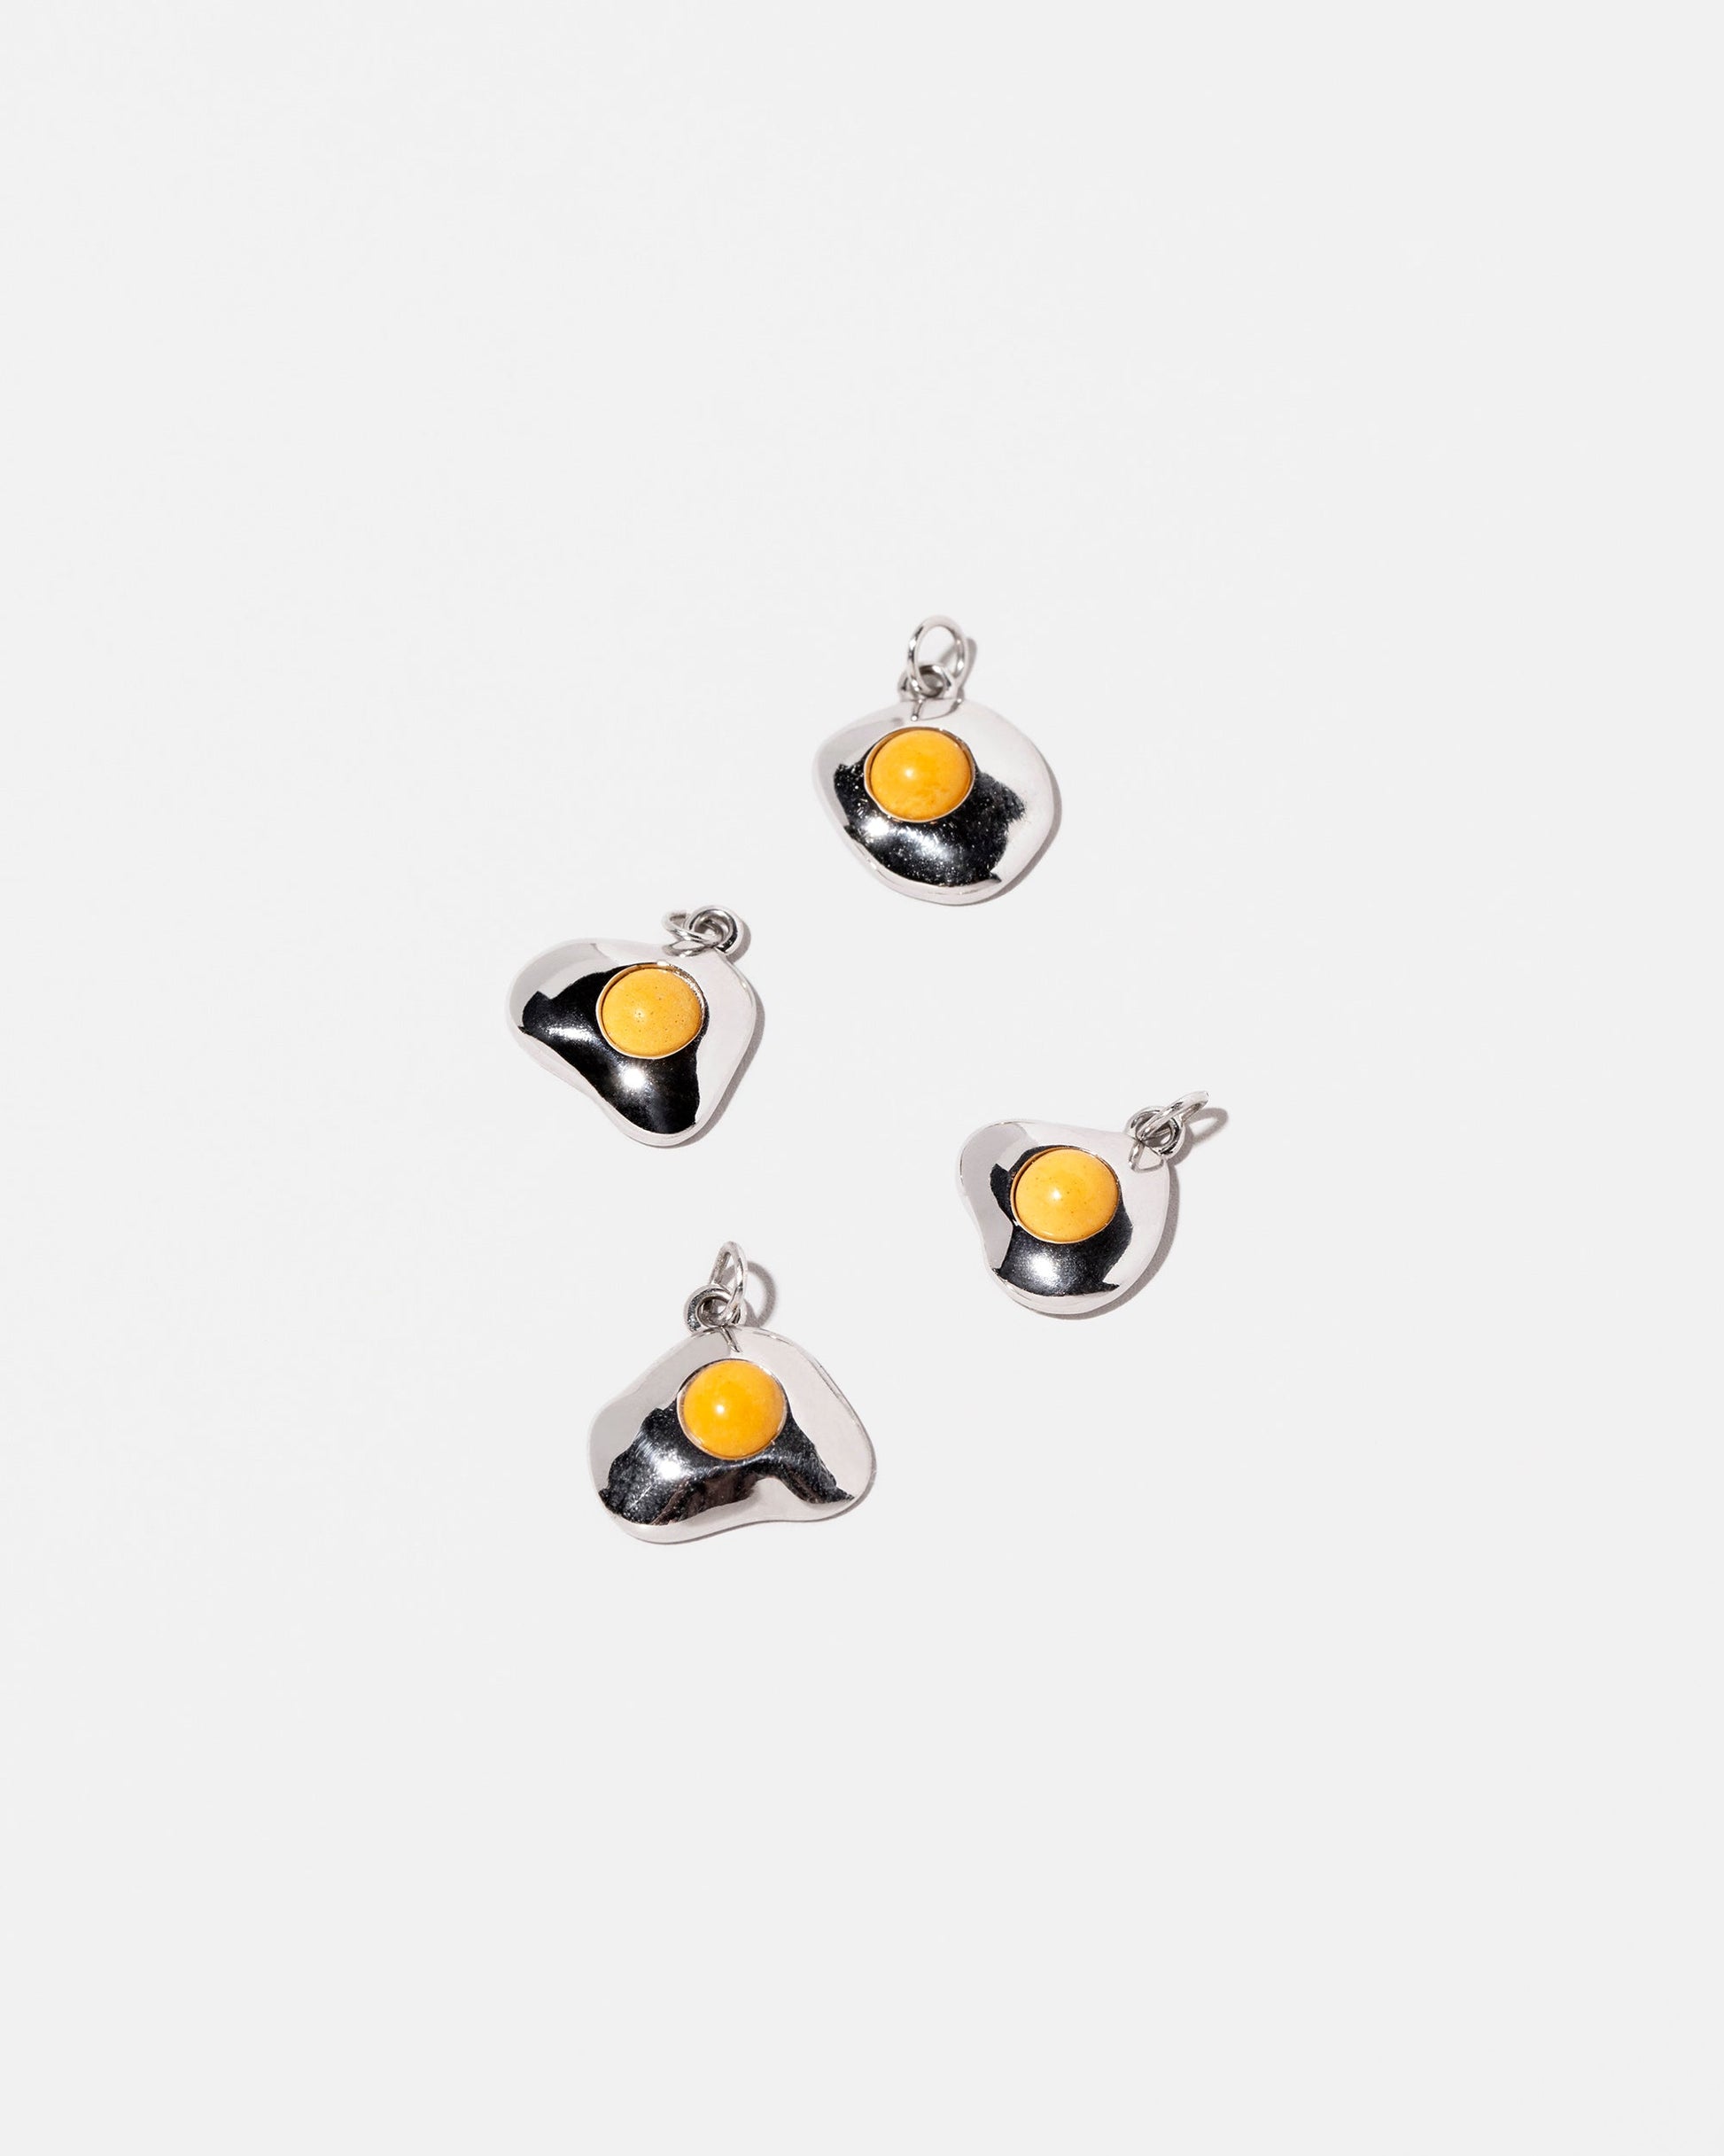 Group of Sunny Side Up Egg Charms on light color background.